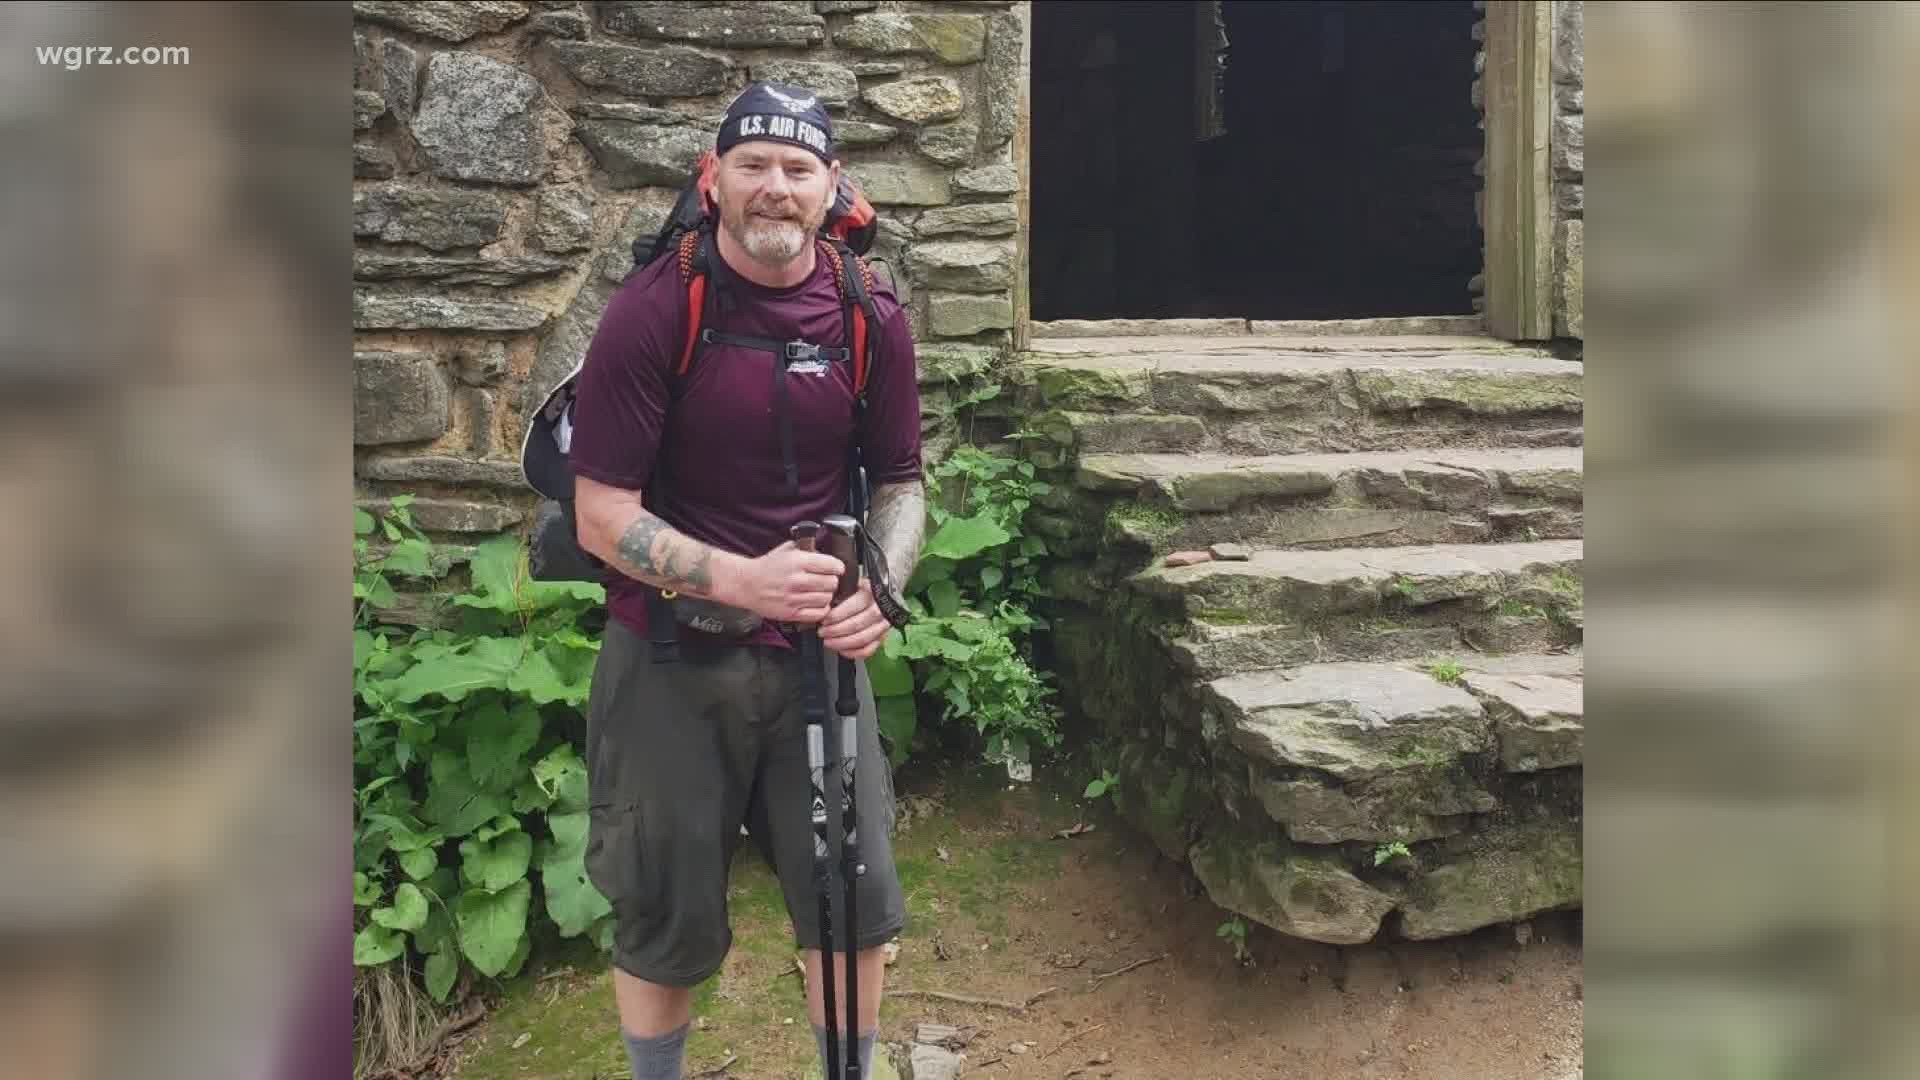 Dan Schoenthal has Parkinson's. He set out to hike 22-hundred miles along the Appalachian trail and raise money for the Parkinson's Foundation of WNY.